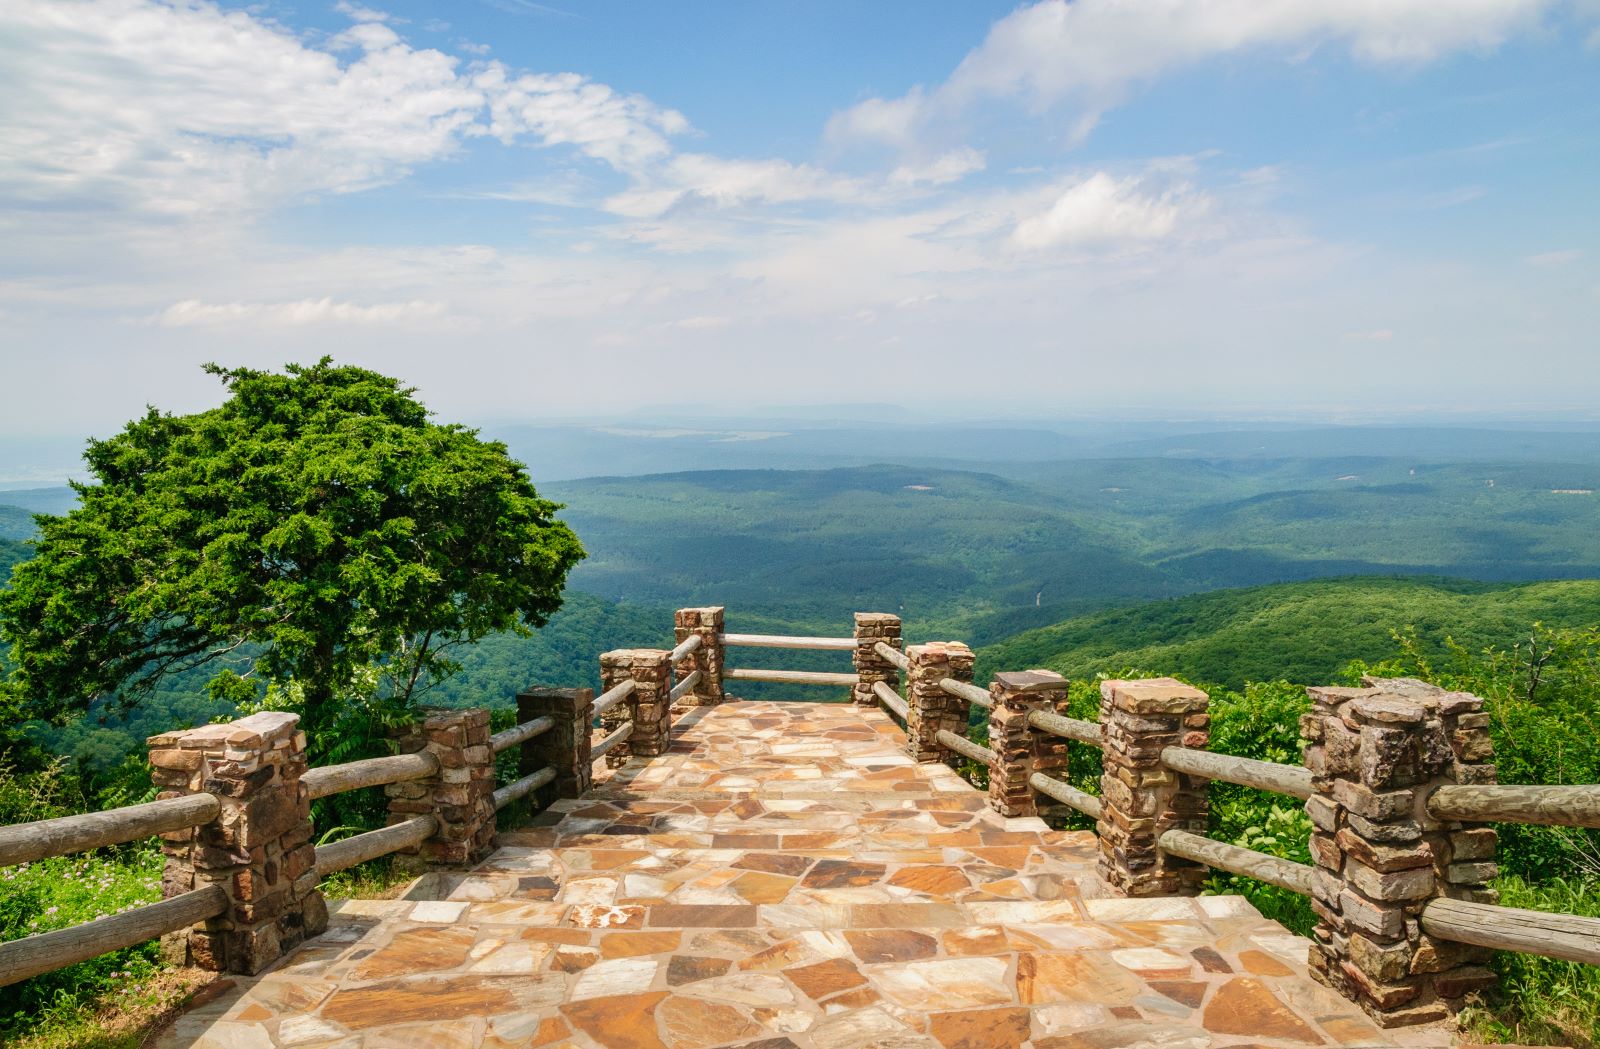 <p class="wp-caption-text">Image Credit: Shutterstock / Zack Frank</p>  <p>Drive through the heart of the Ozarks, with its rolling hills, lush forests, and quaint towns. A peaceful retreat into nature’s beauty.</p>